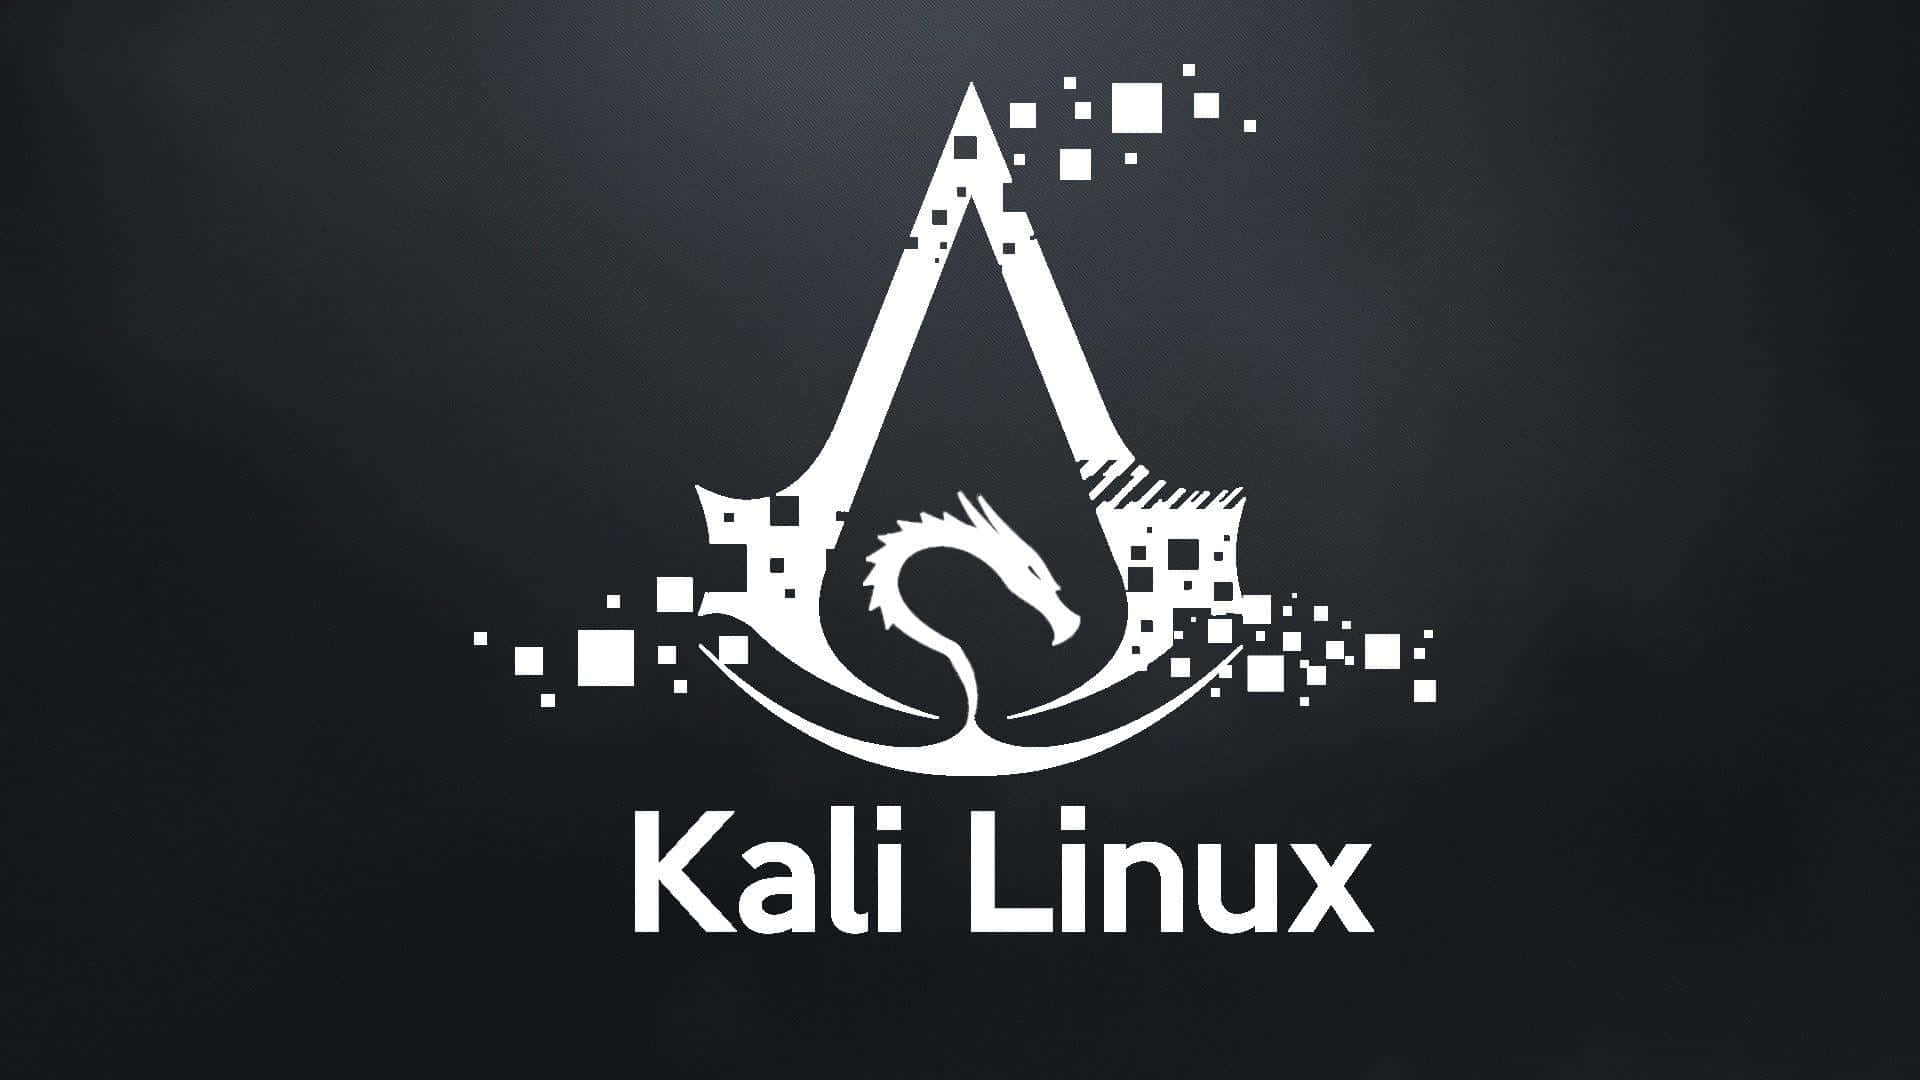 A weathered background of a Kali Linux Linux operating system, featuring a skull logo.